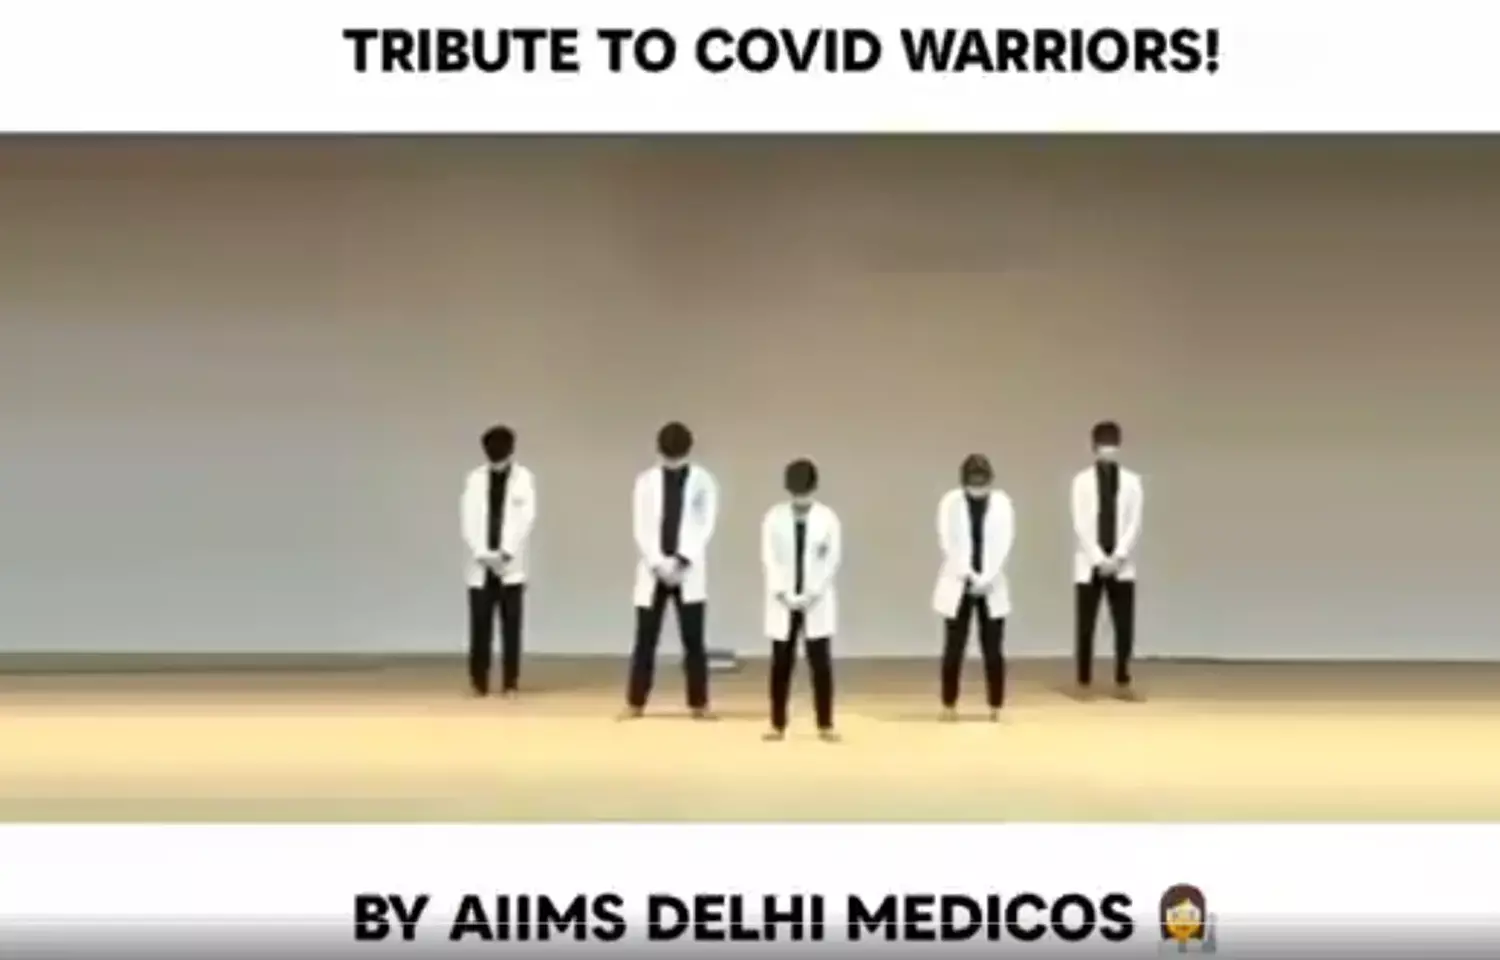 AIIMS Delhi Medicos Pay Tribute to Doctors Fighting Covid-19 Pandemic in Heart-warming Video